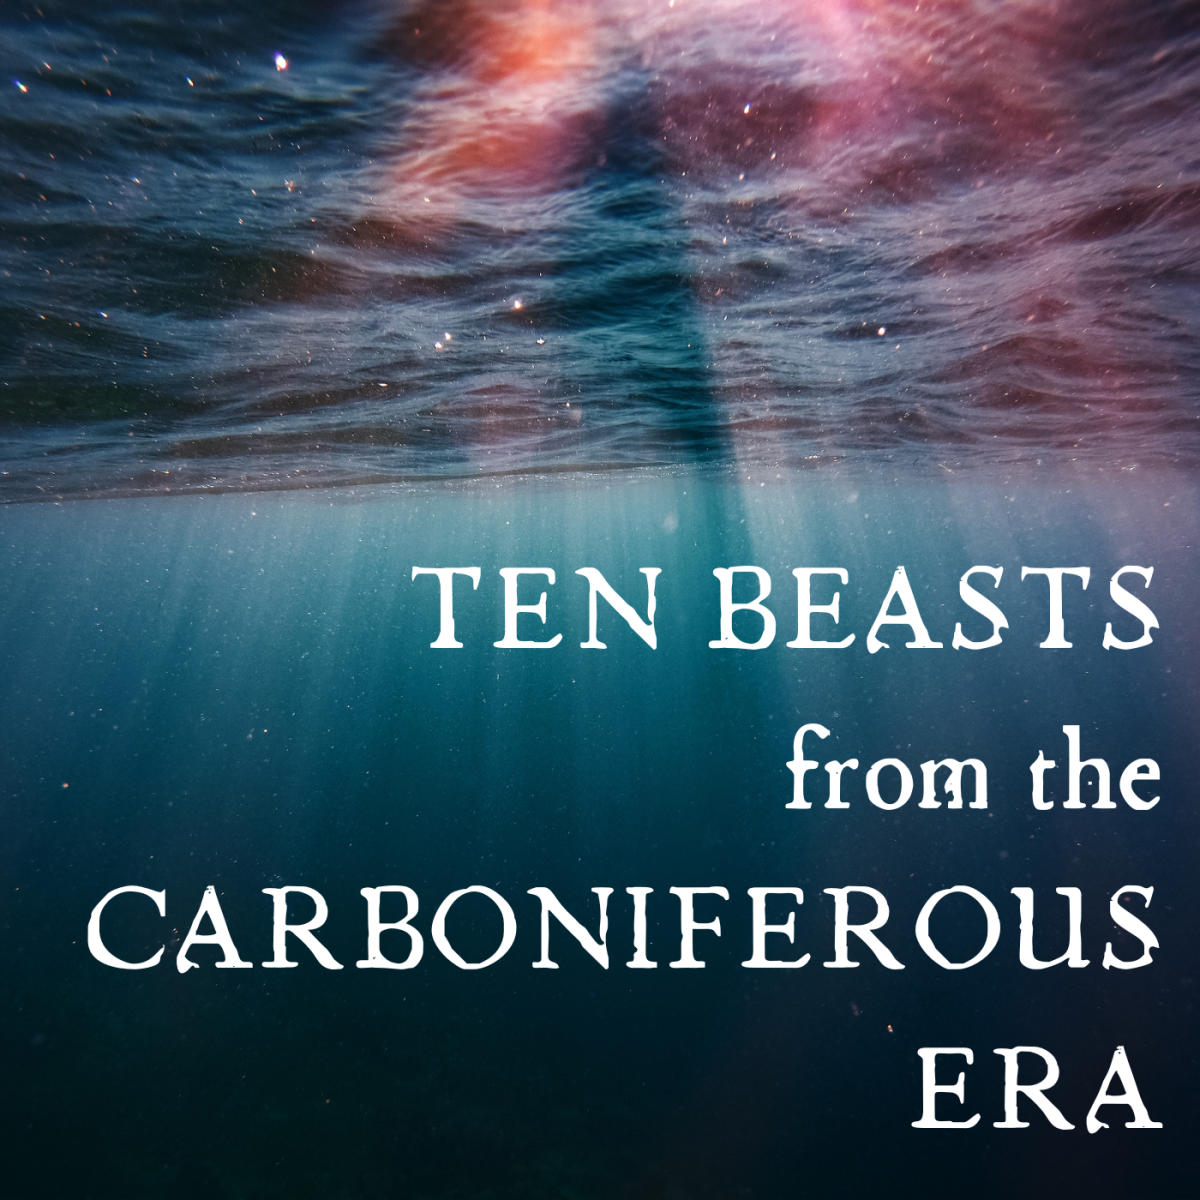 Here are ten of the coolest, creepiest beasts from the Carboniferous Era